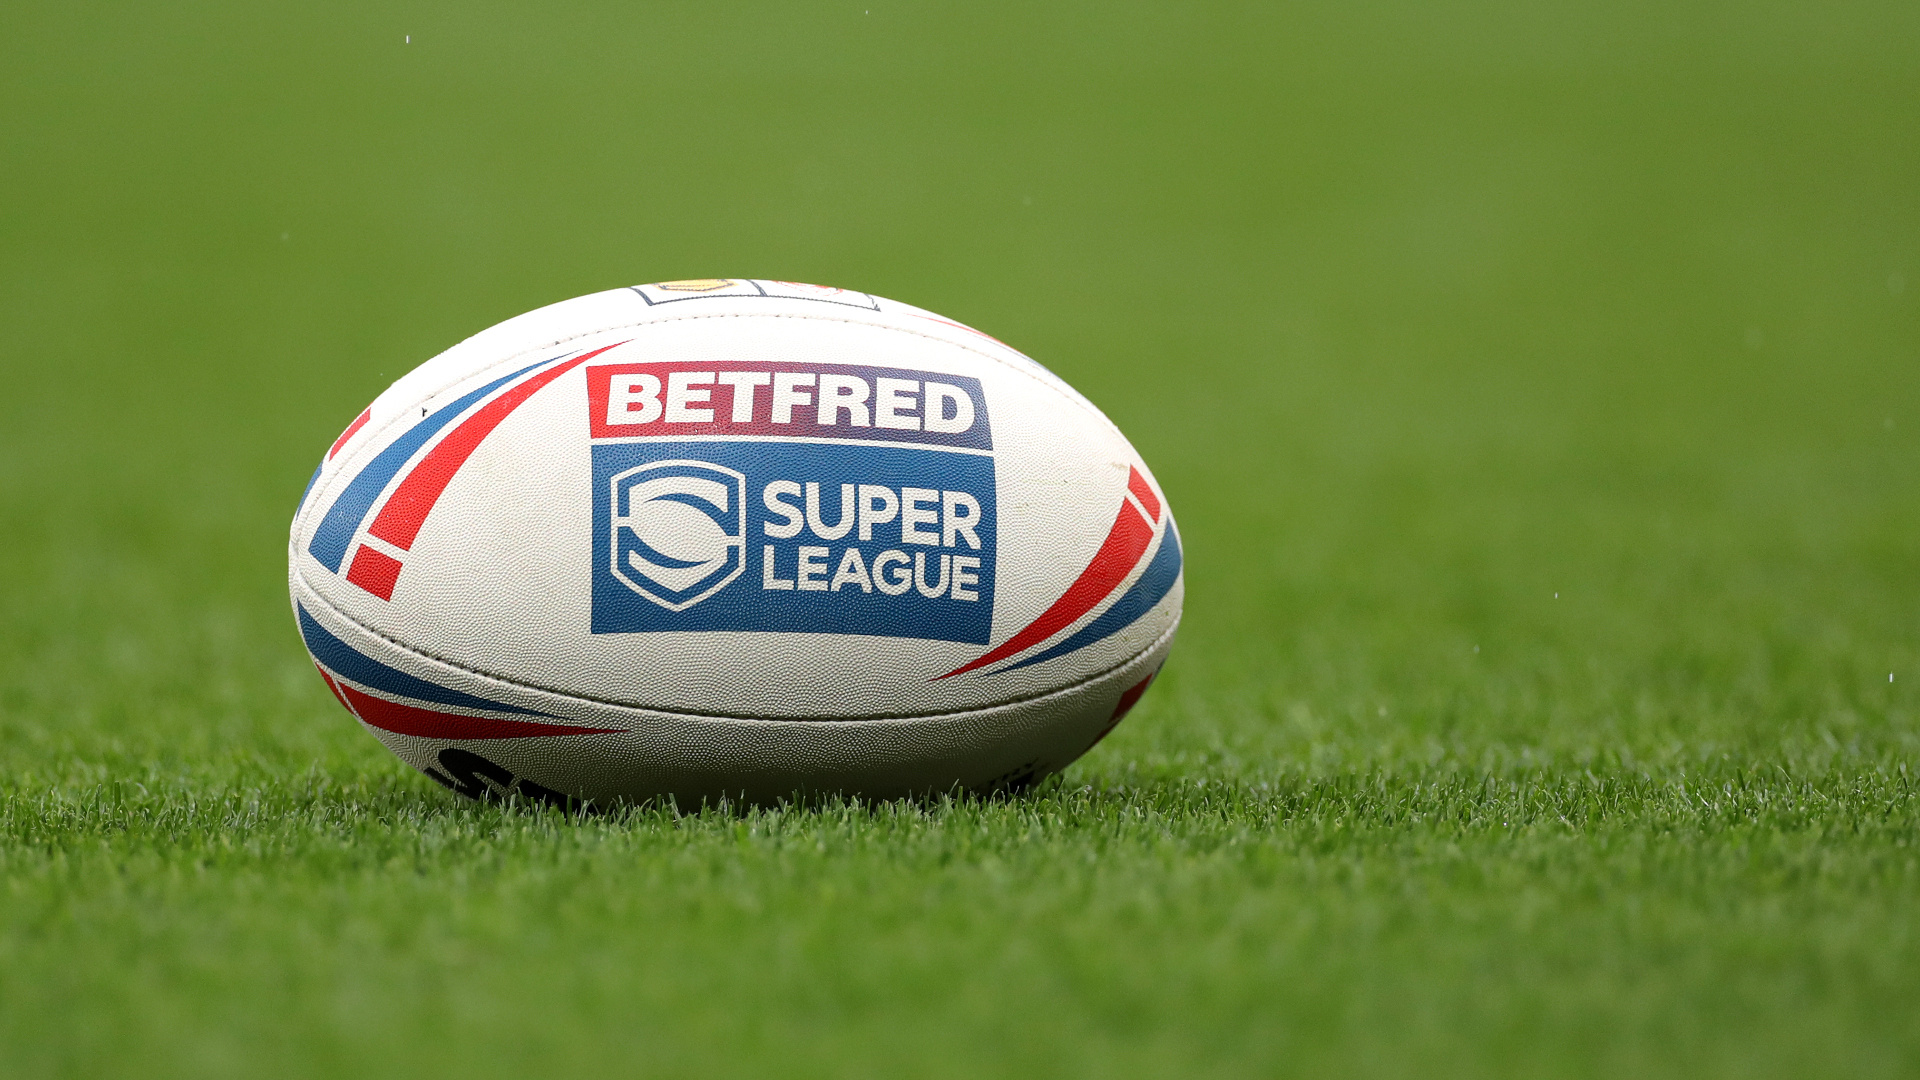 Rugby League: An official Betfred Super League ball, The top-level of the British system. 1920x1080 Full HD Background.